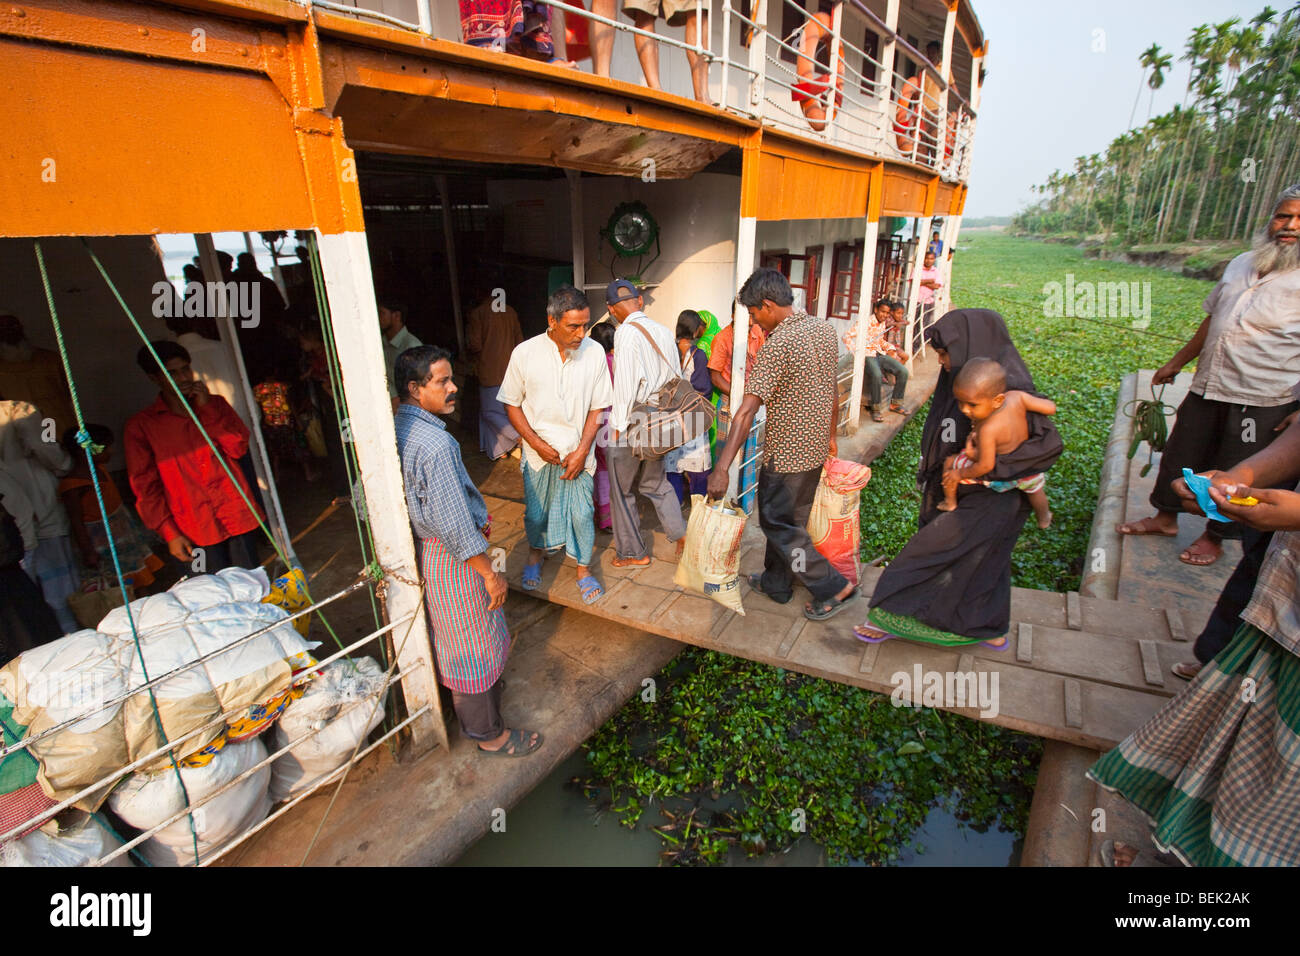 People boarding the Mahsud Rocket Paddle Wheel Boat at a dock on the Brahmaputra River in Bangladesh Stock Photo